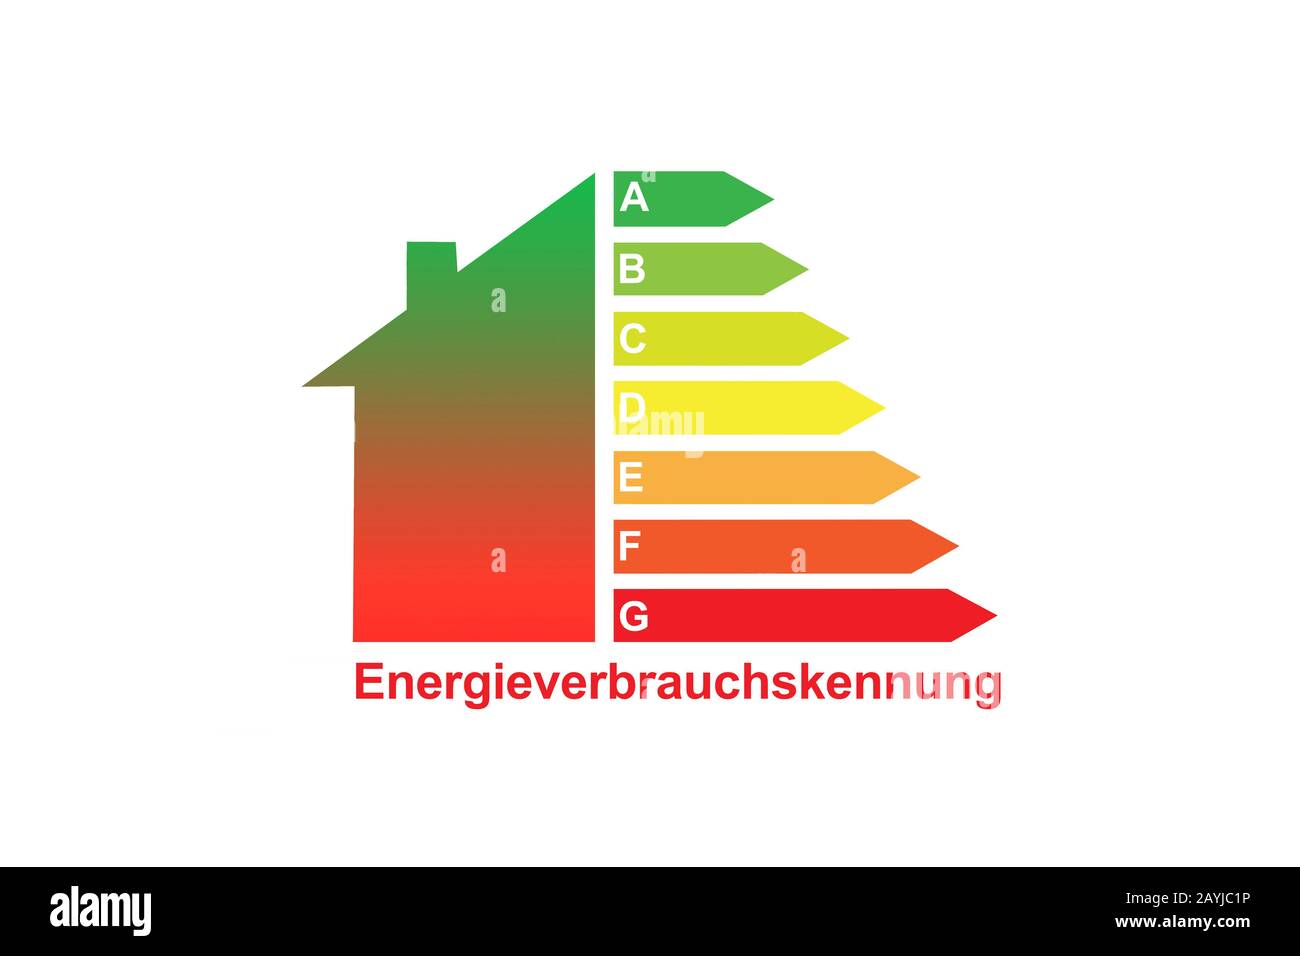 lable of power efficiency lables for a single family house, Germany Stock Photo